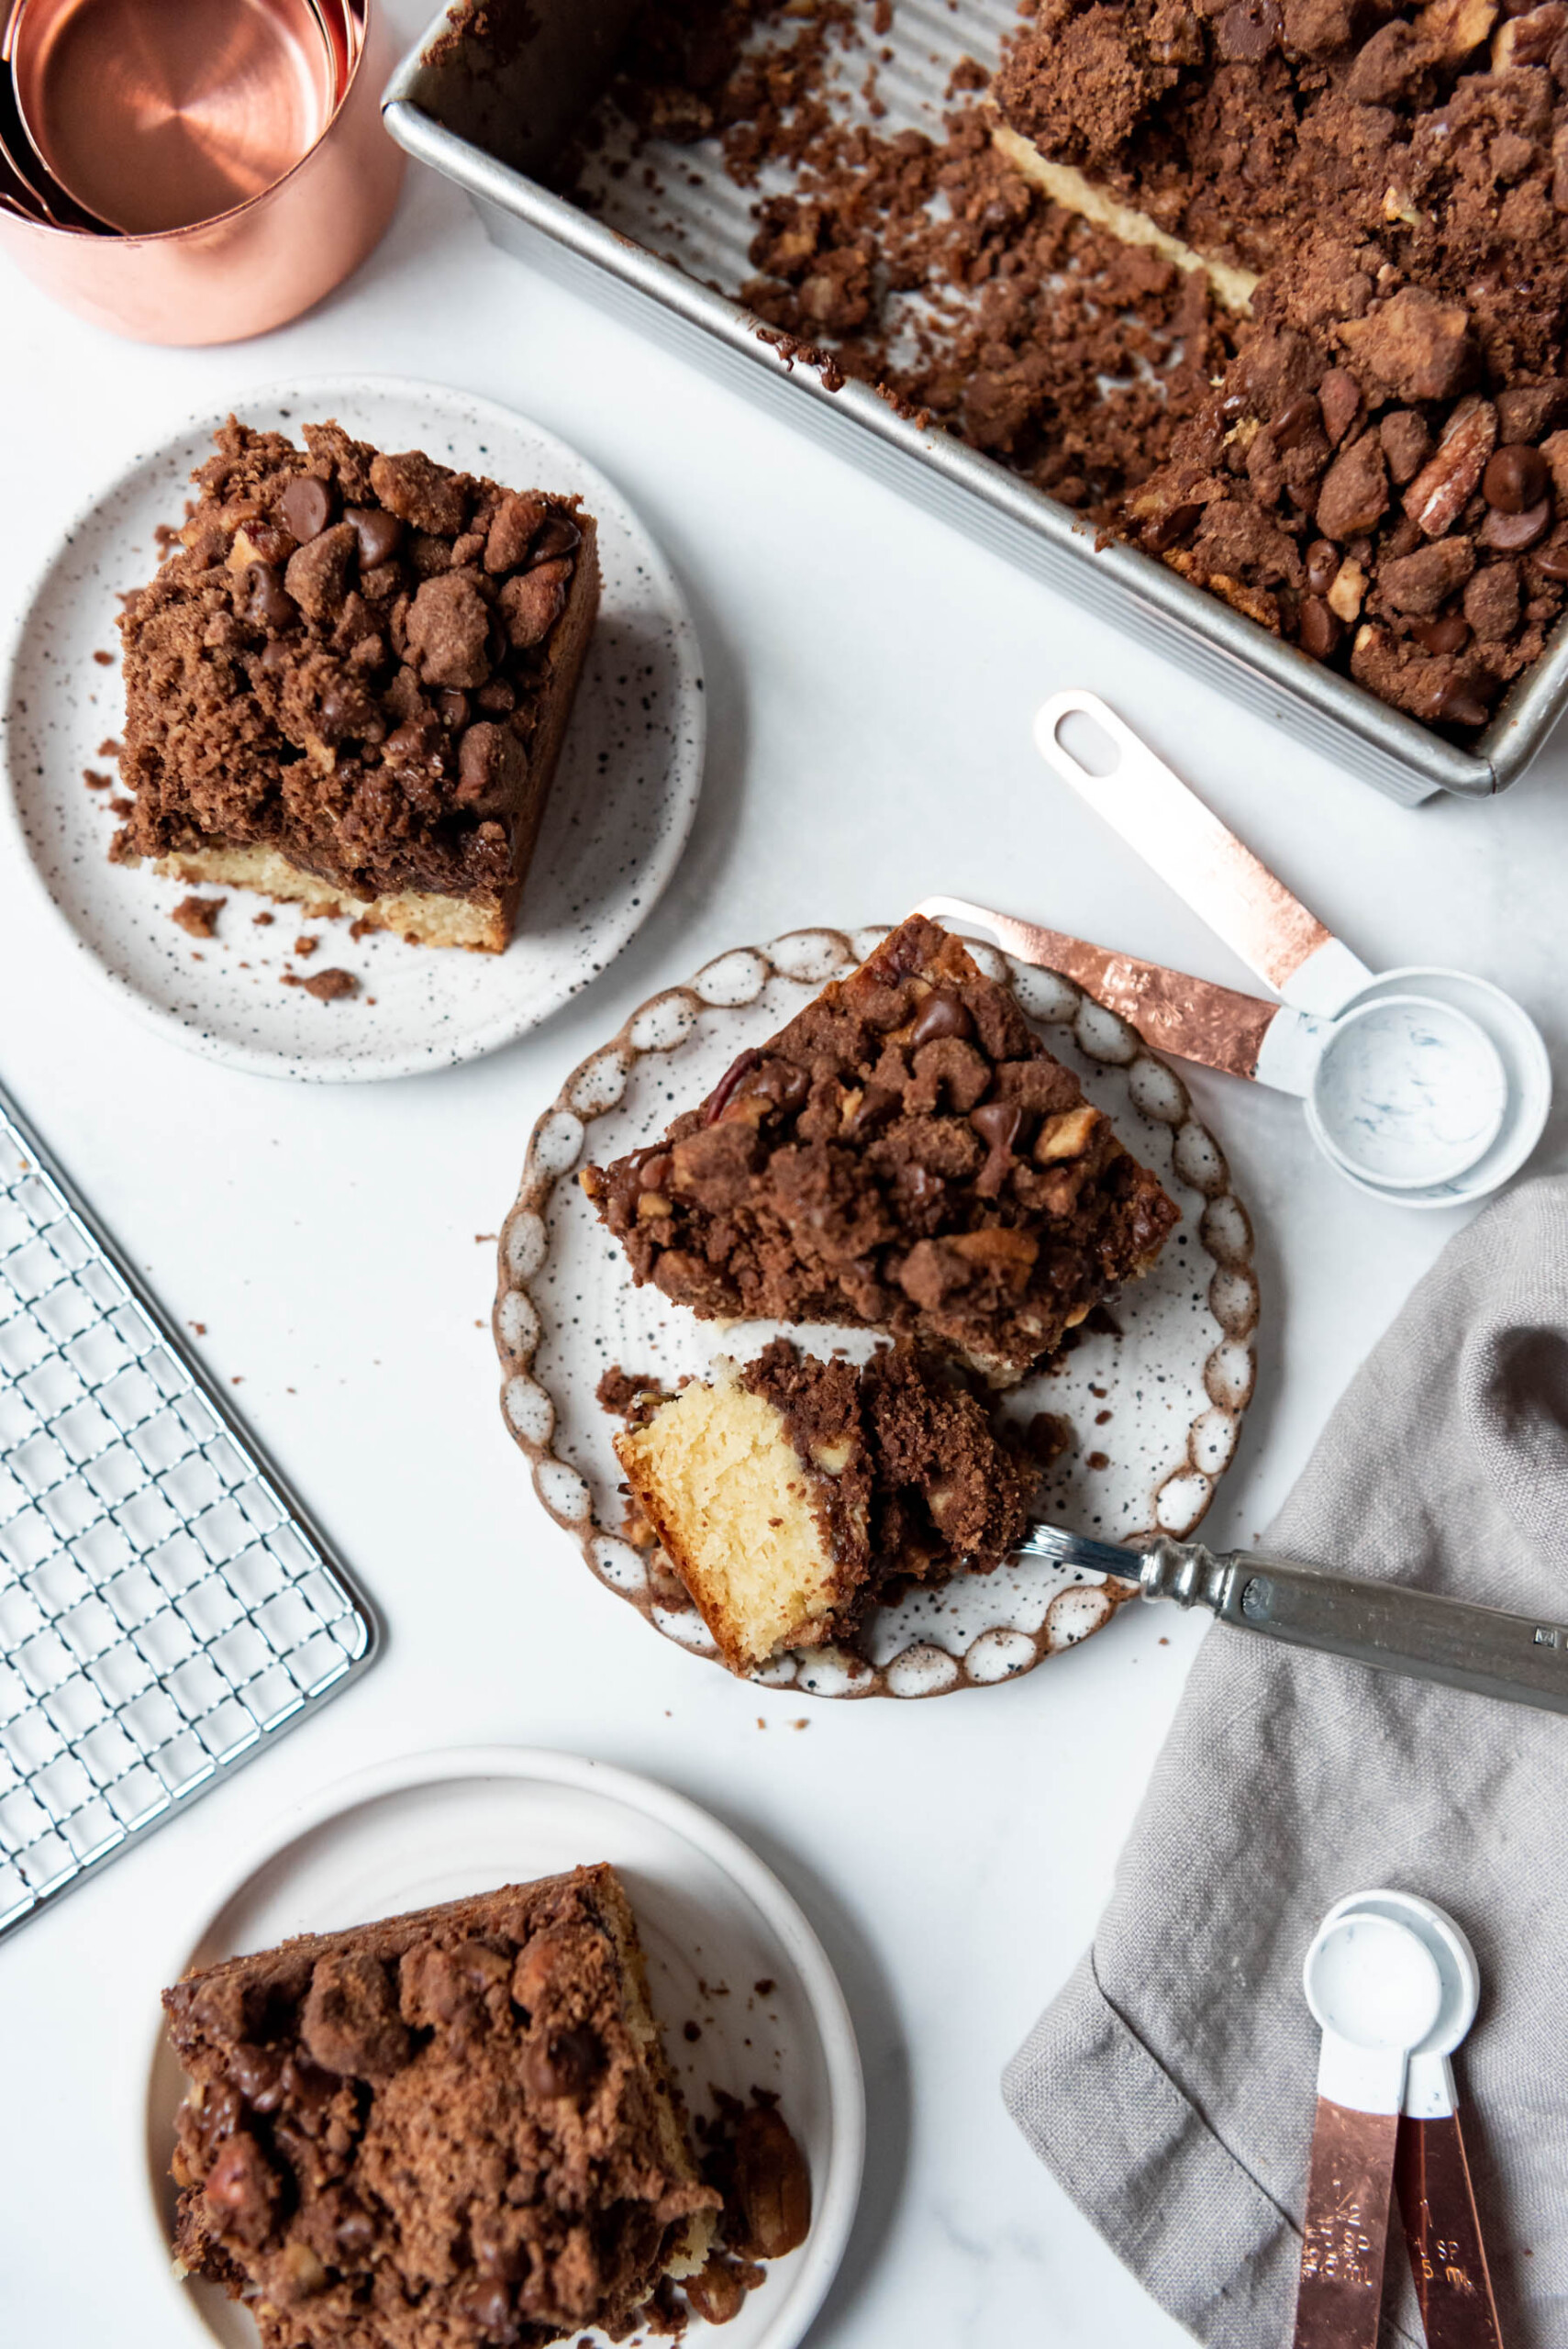 An overhead image of slices of chocolate pecan crumb cake on plates with a fork holding a bite of cake on one plate.